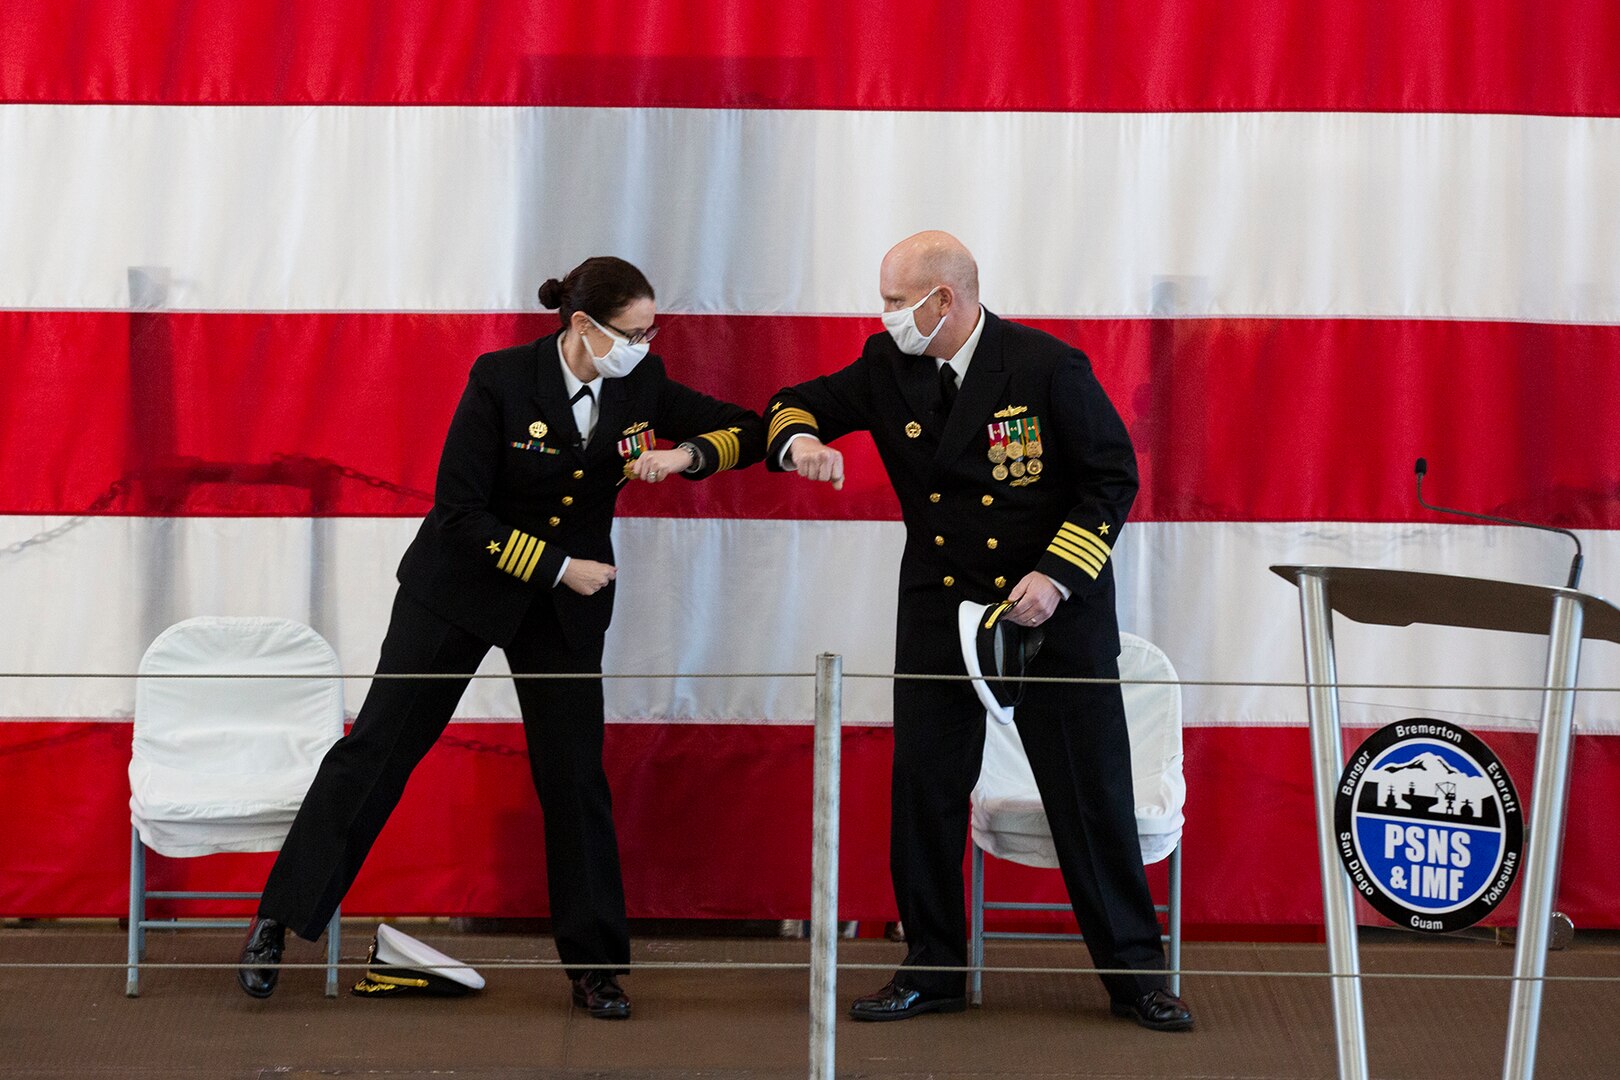 Puget Sound Naval Shipyard & Intermediate Maintenance Facility welcomed its new commander Dec. 2, 2020, at the shipyard in Bremerton, Washington, during a unique change of command ceremony that was arranged to protect participants and audience members from COVID-19. Capt. Jip Mosman relieved Capt. Dianna Wolfson during the ceremony in the historic Building 460. Vice Adm. William J. Galinis, commander, Naval Sea Systems Command, participated in the event via teleconference from NAVSEA headquarters in Washington, D.C. (PSNS & IMF photo by Carie Hagins)